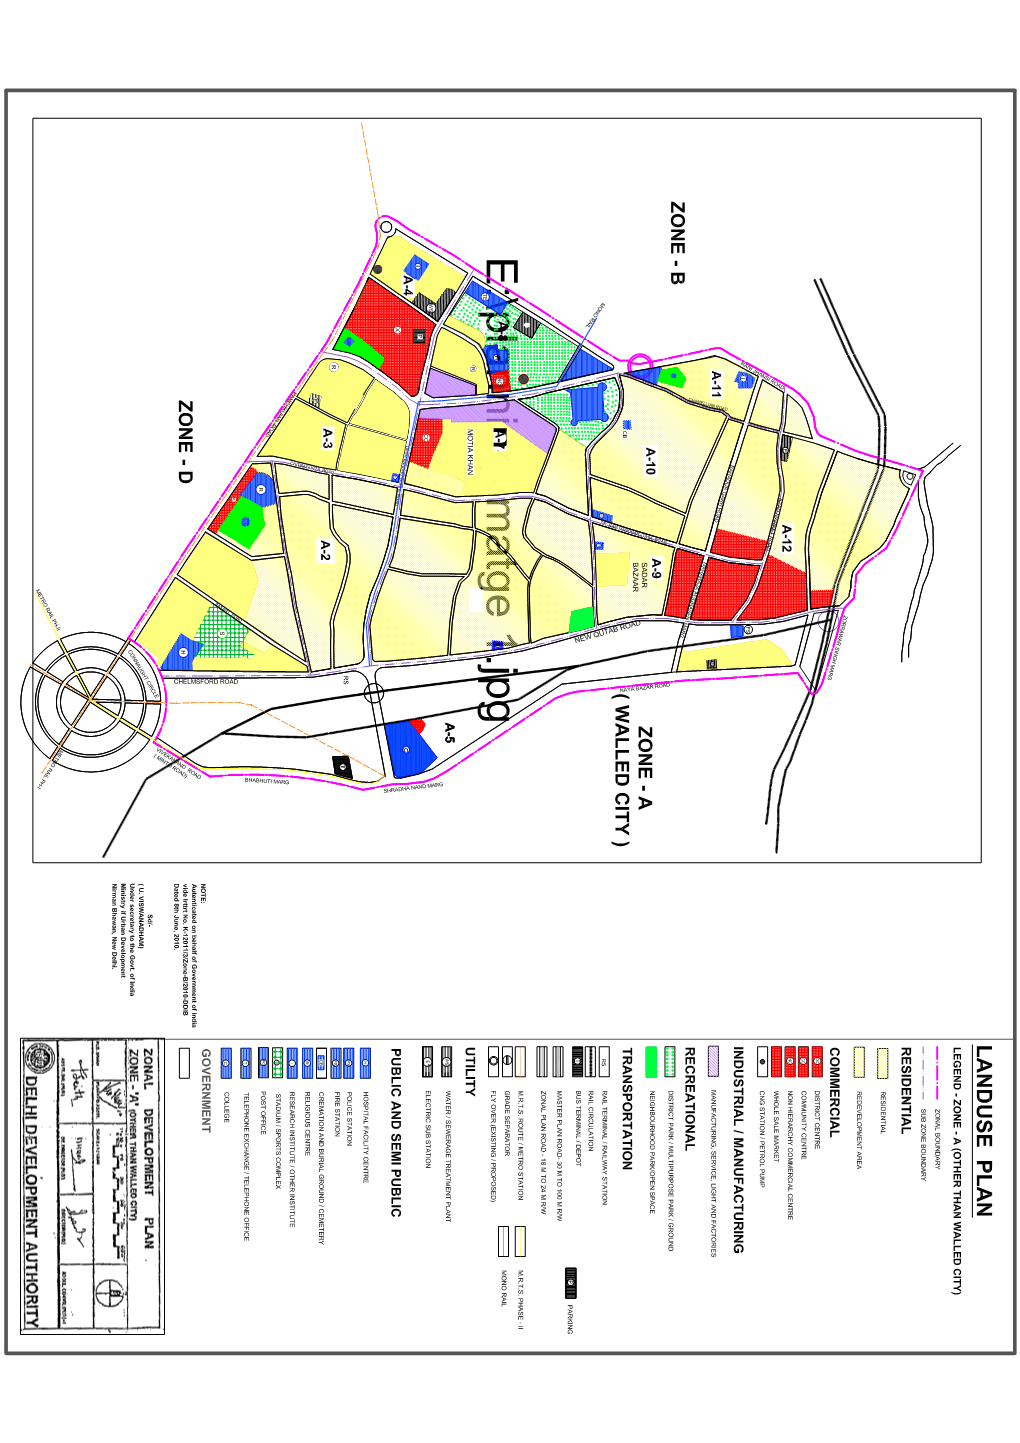 Zonal Development Plan Zone “A” (Other Than Walled City)